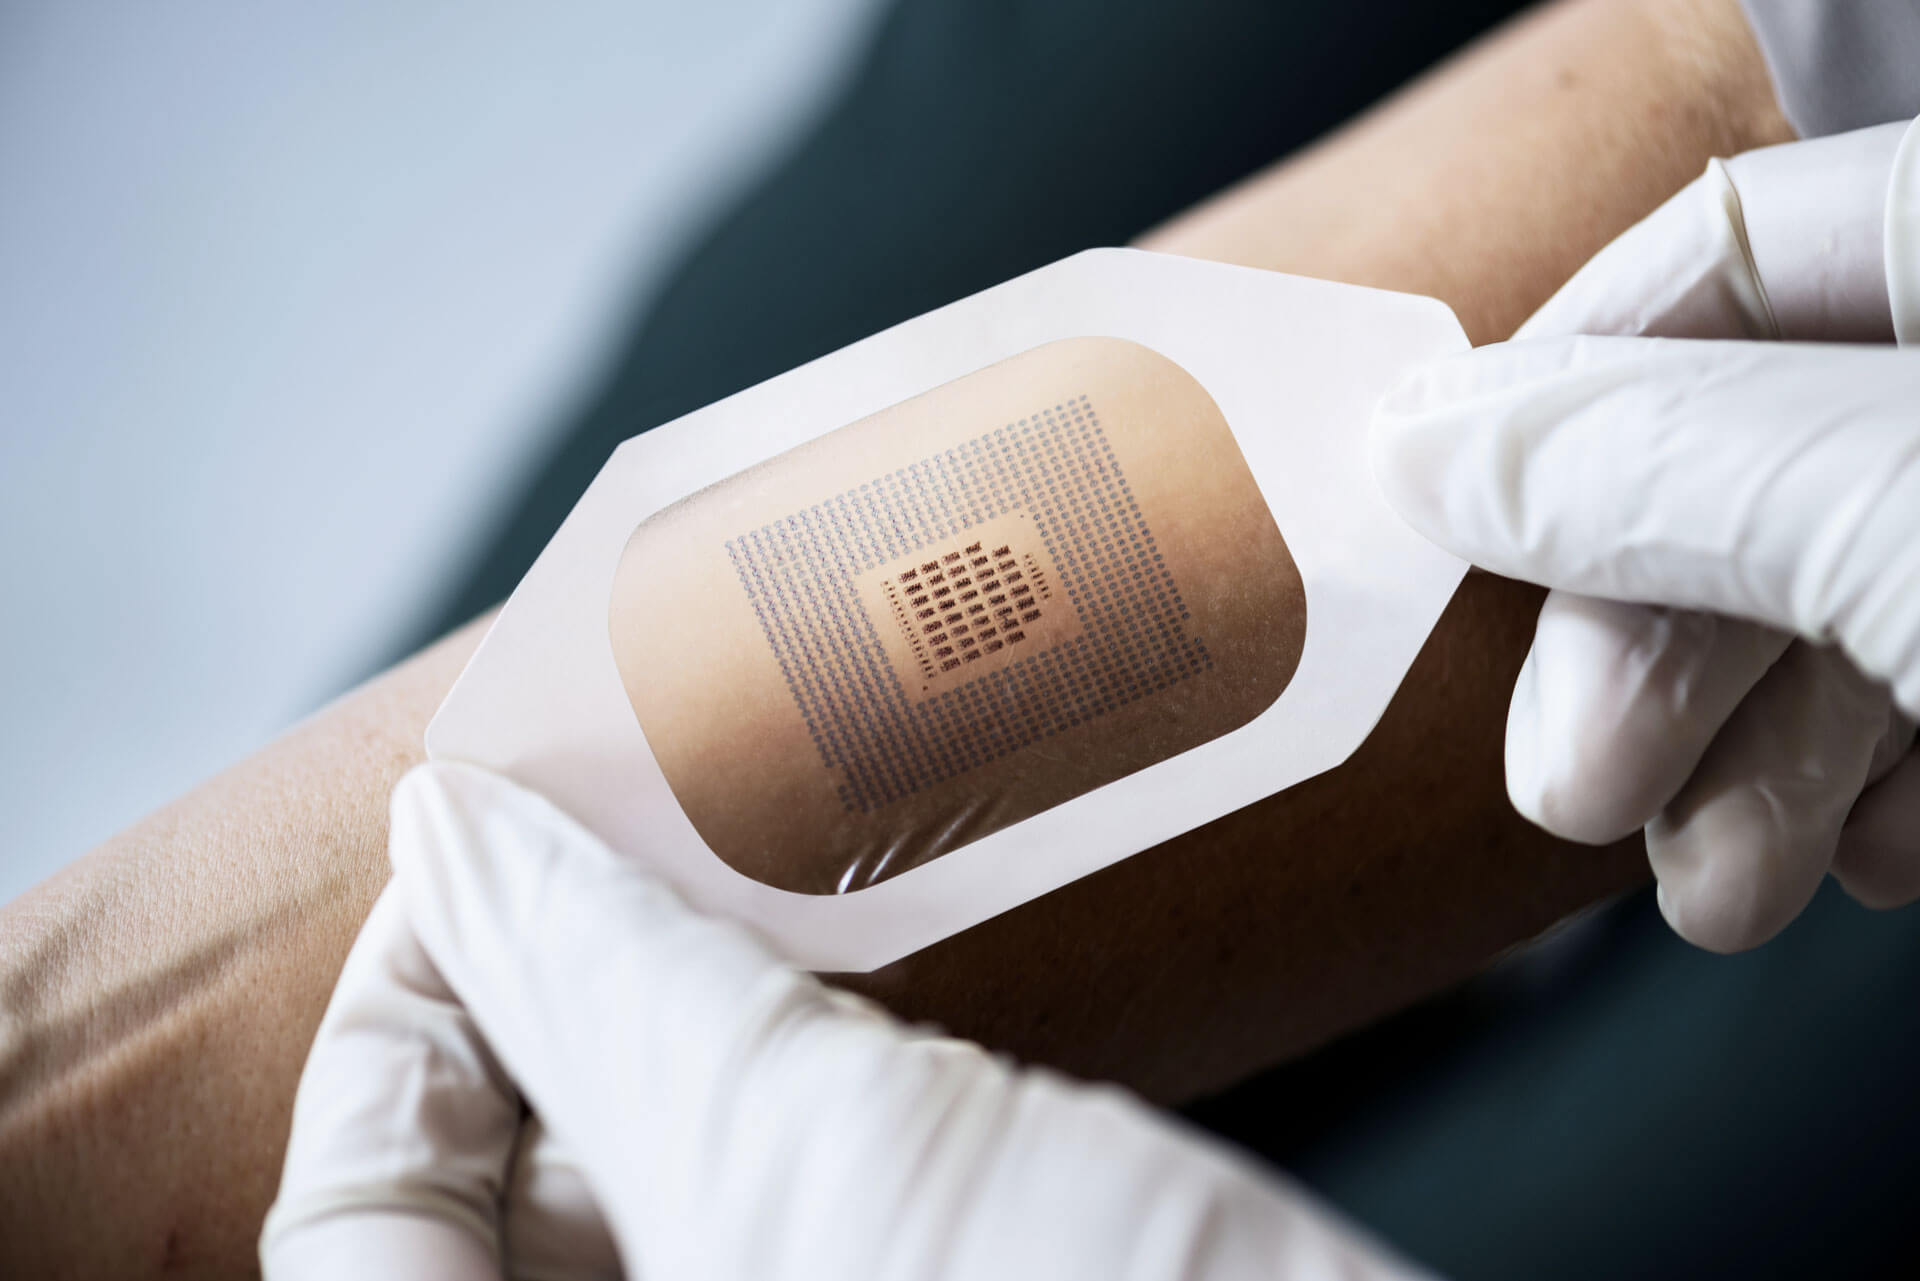 Sticking to Skin – Tapes and Patches for Wearable Medical Devices